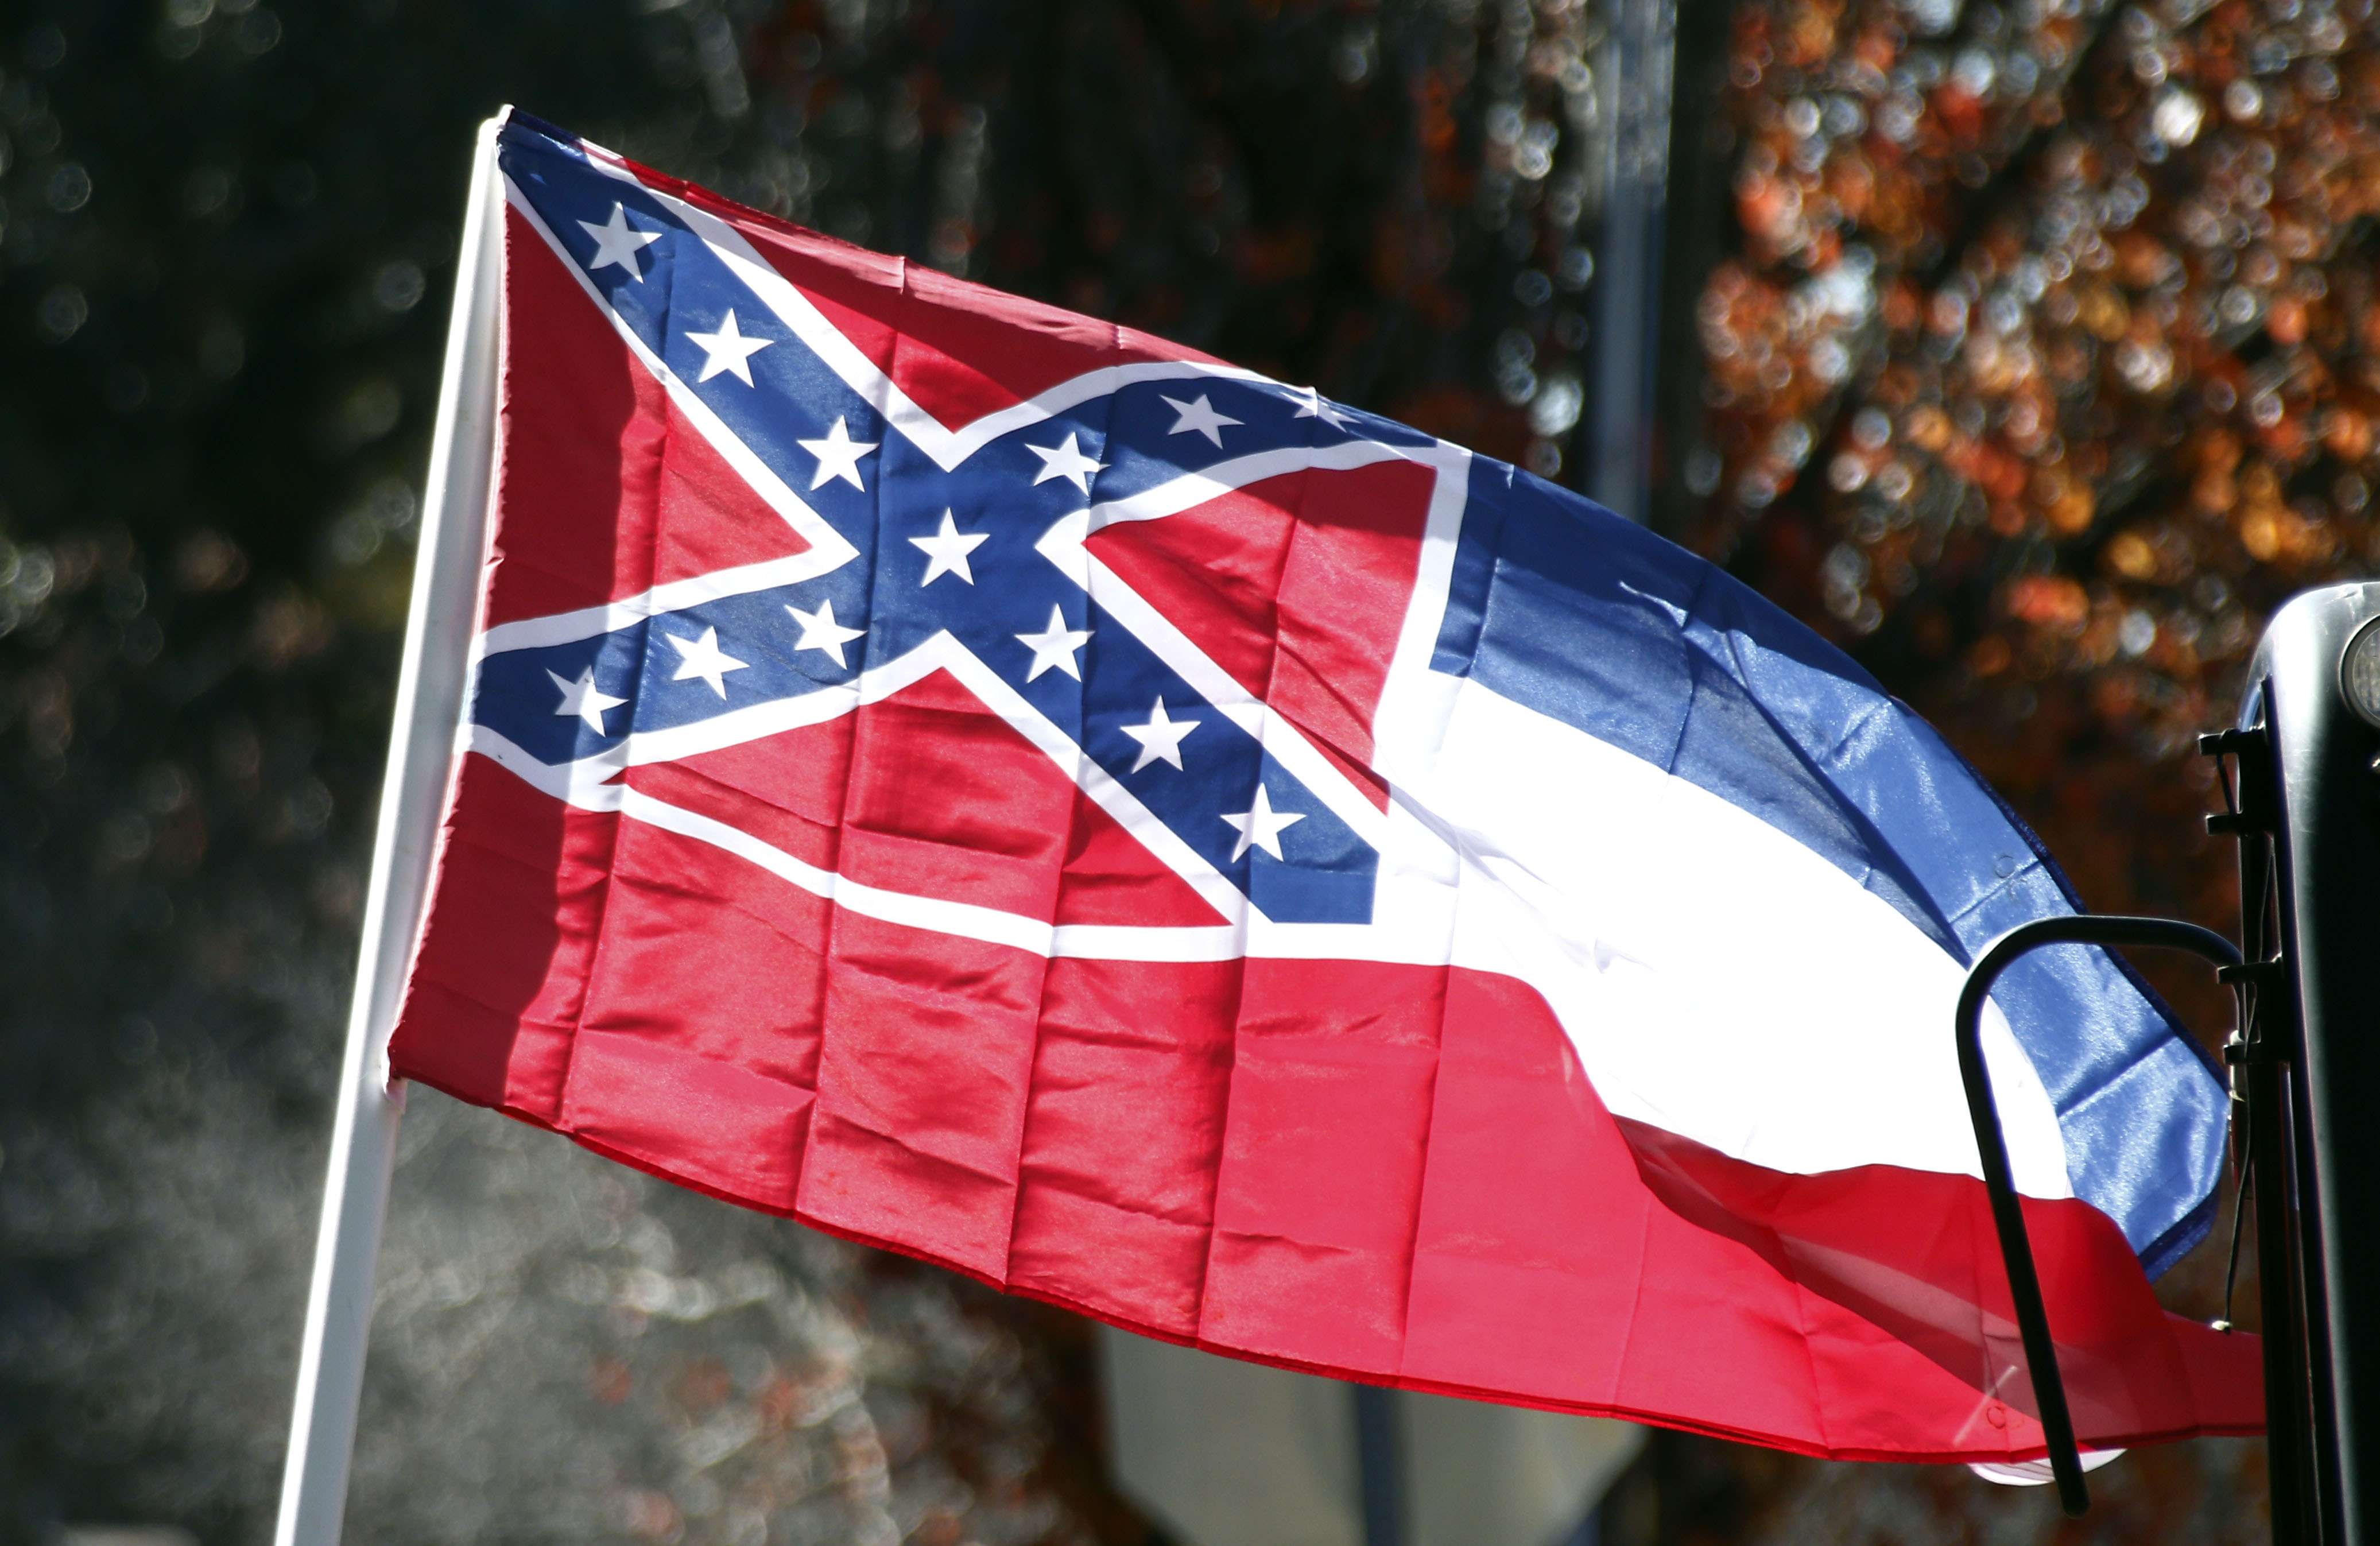 In this Tuesday, Jan. 19, 2016 photo, a state flag of Mississippi is unfurled by Sons of Confederate Veterans and other groups on the grounds of the state Capitol in Jackson, Miss., in support of keeping the Confederate battle emblem on the state flag. Mississippi's attorney general said Wednesday, March 2, that he will defend his state's flag against a lawsuit that seeks to remove its Confederate battle emblem, even though he thinks the flag hurts the state and should change. (AP Photo/Rogelio V. Solis)